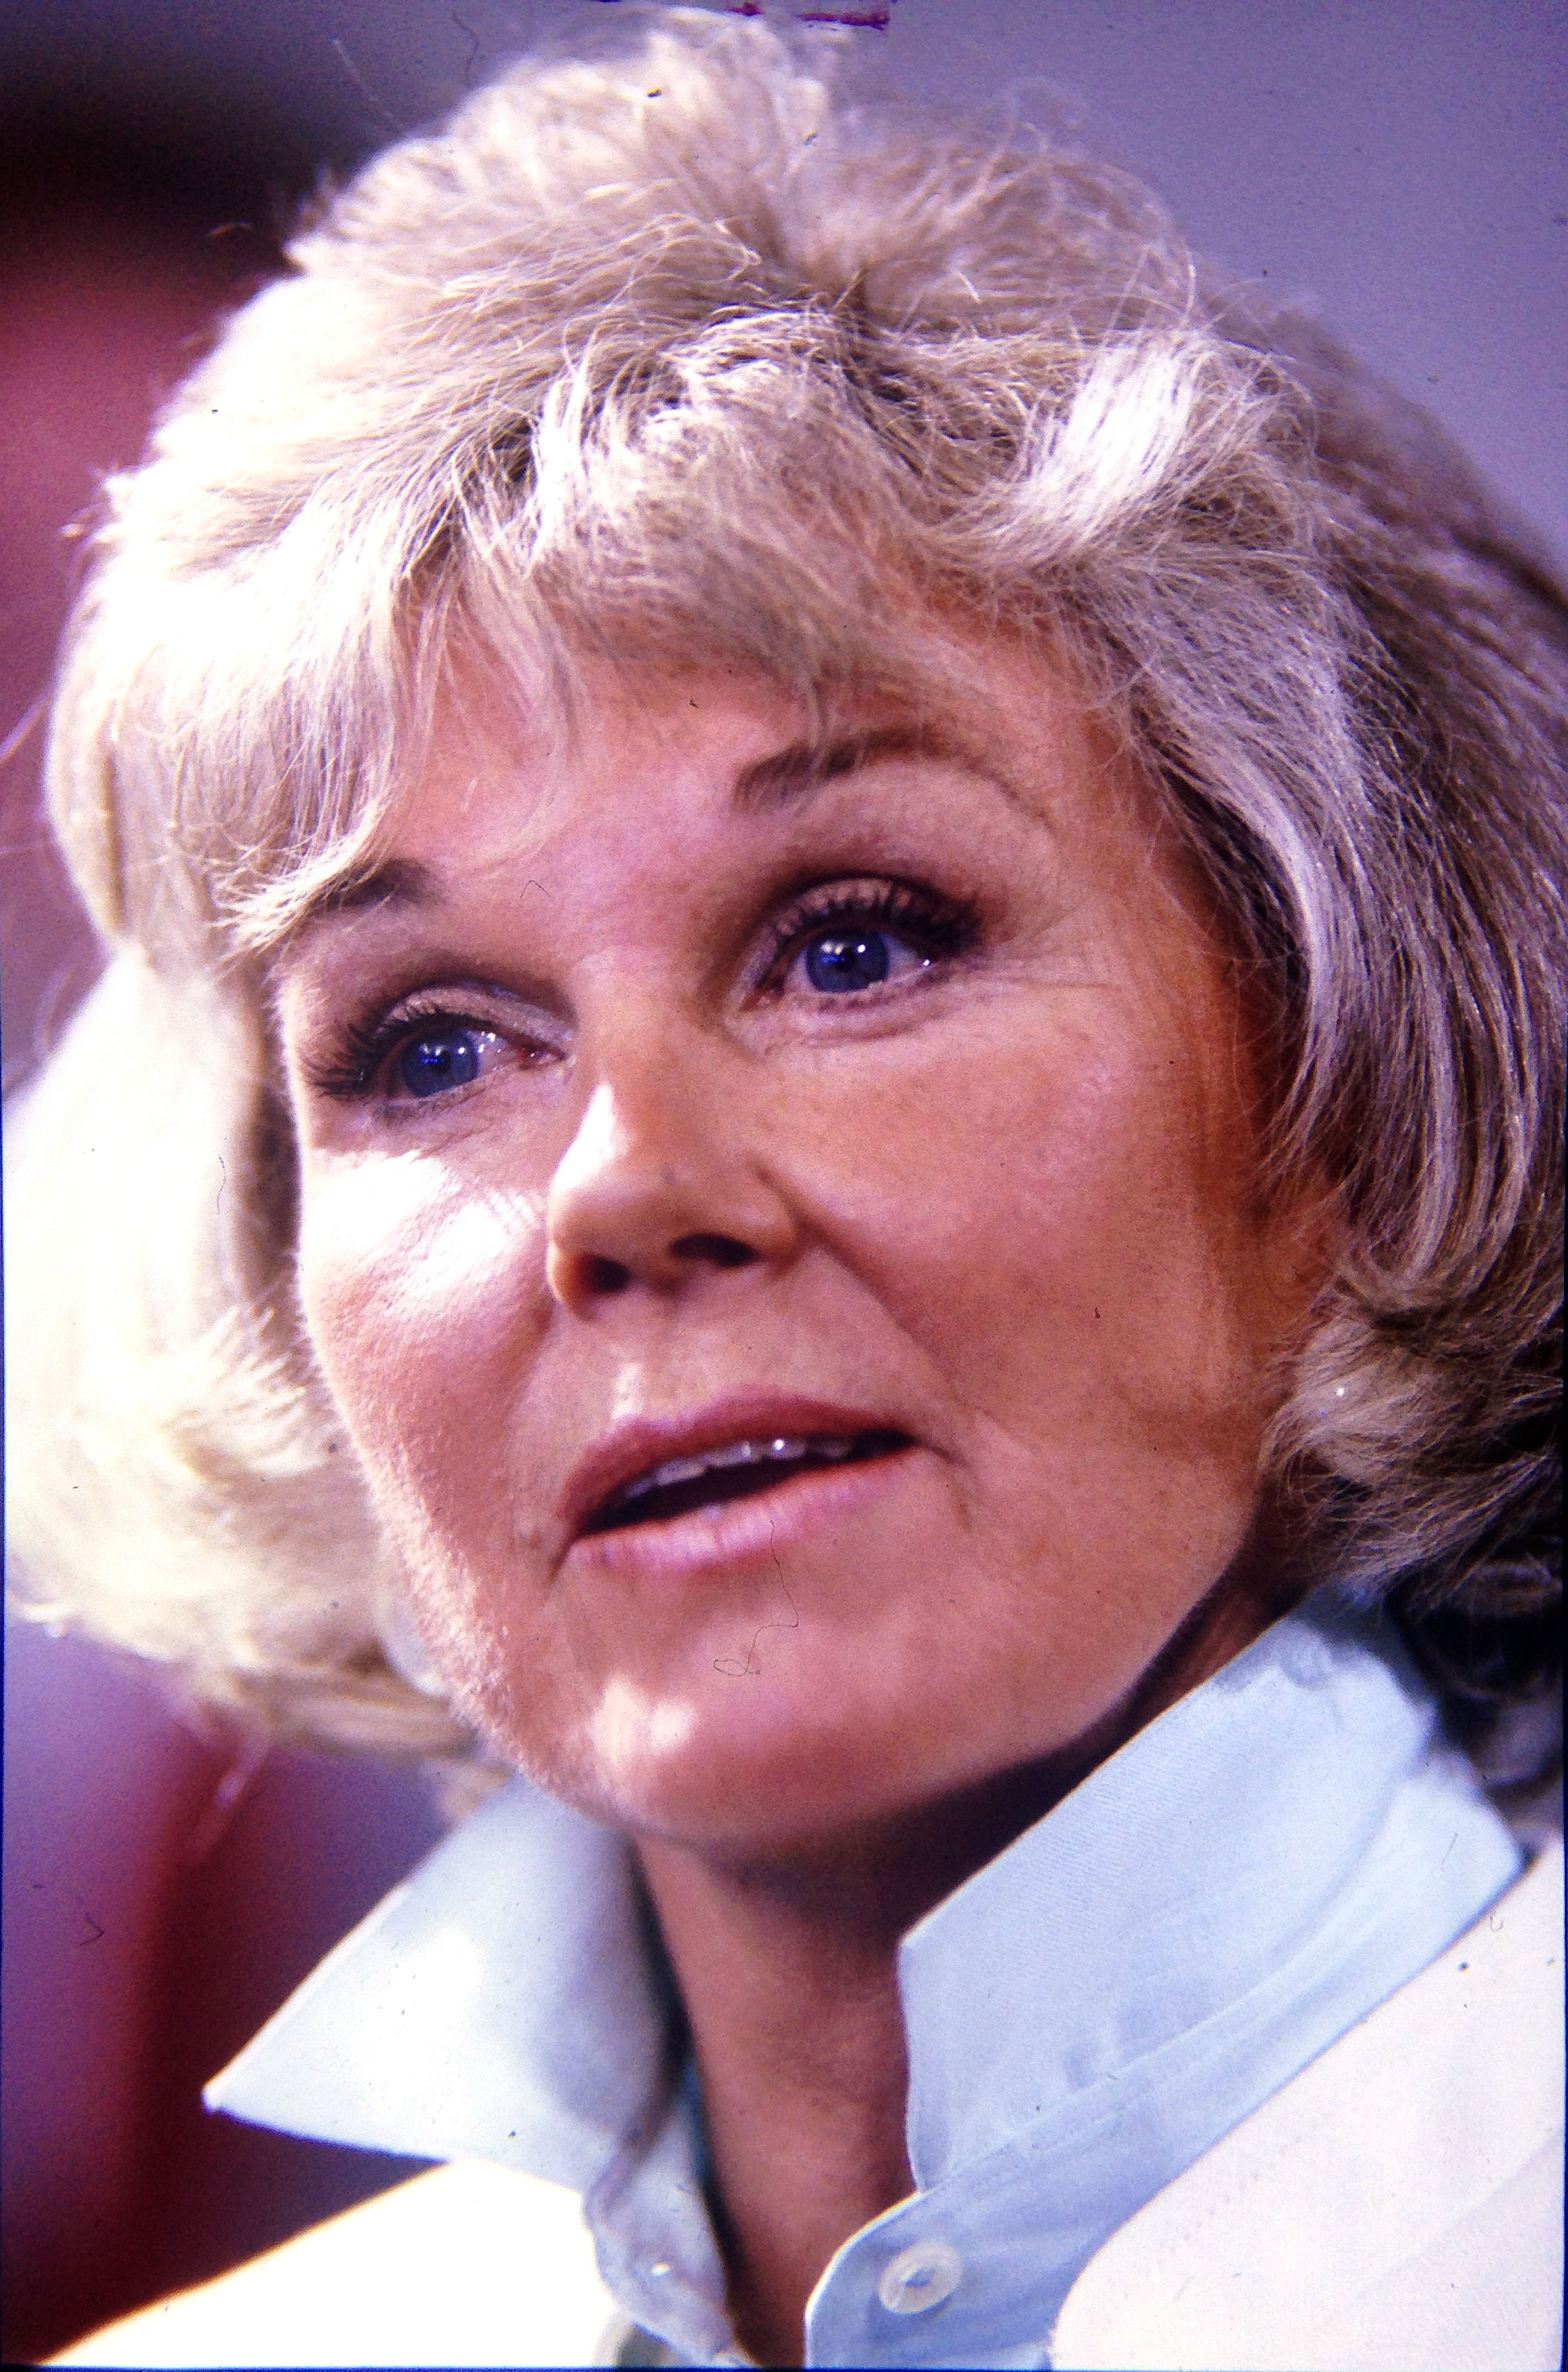 Doris Day speaking at a press conference on July 16, 1985 in Carmel, California | Source: Getty Images